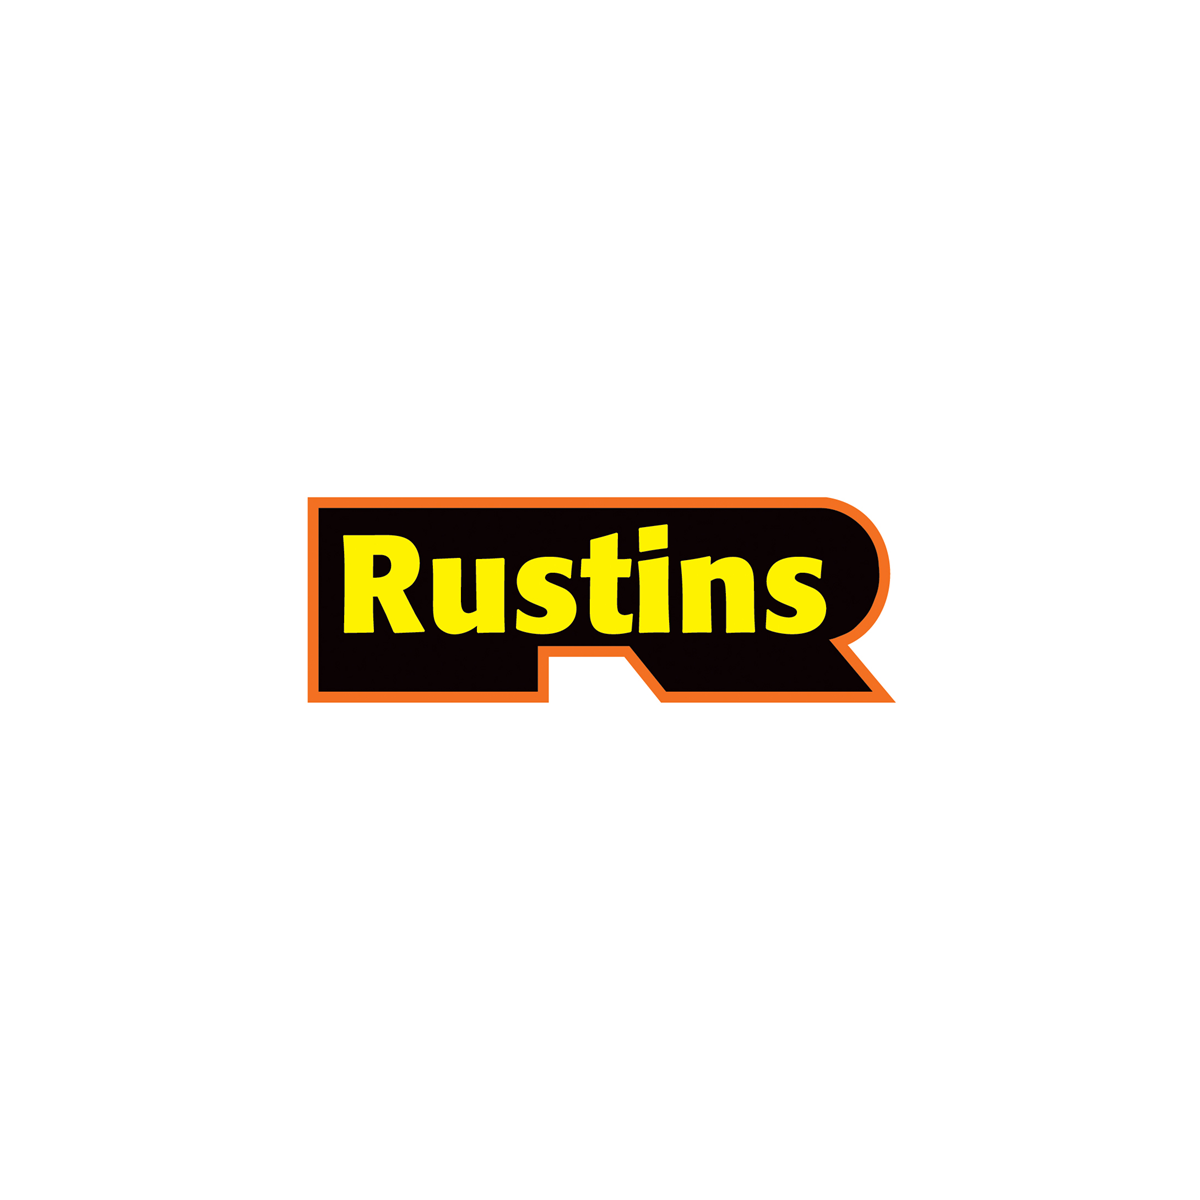 Where to Buy Rustins Wood Filler